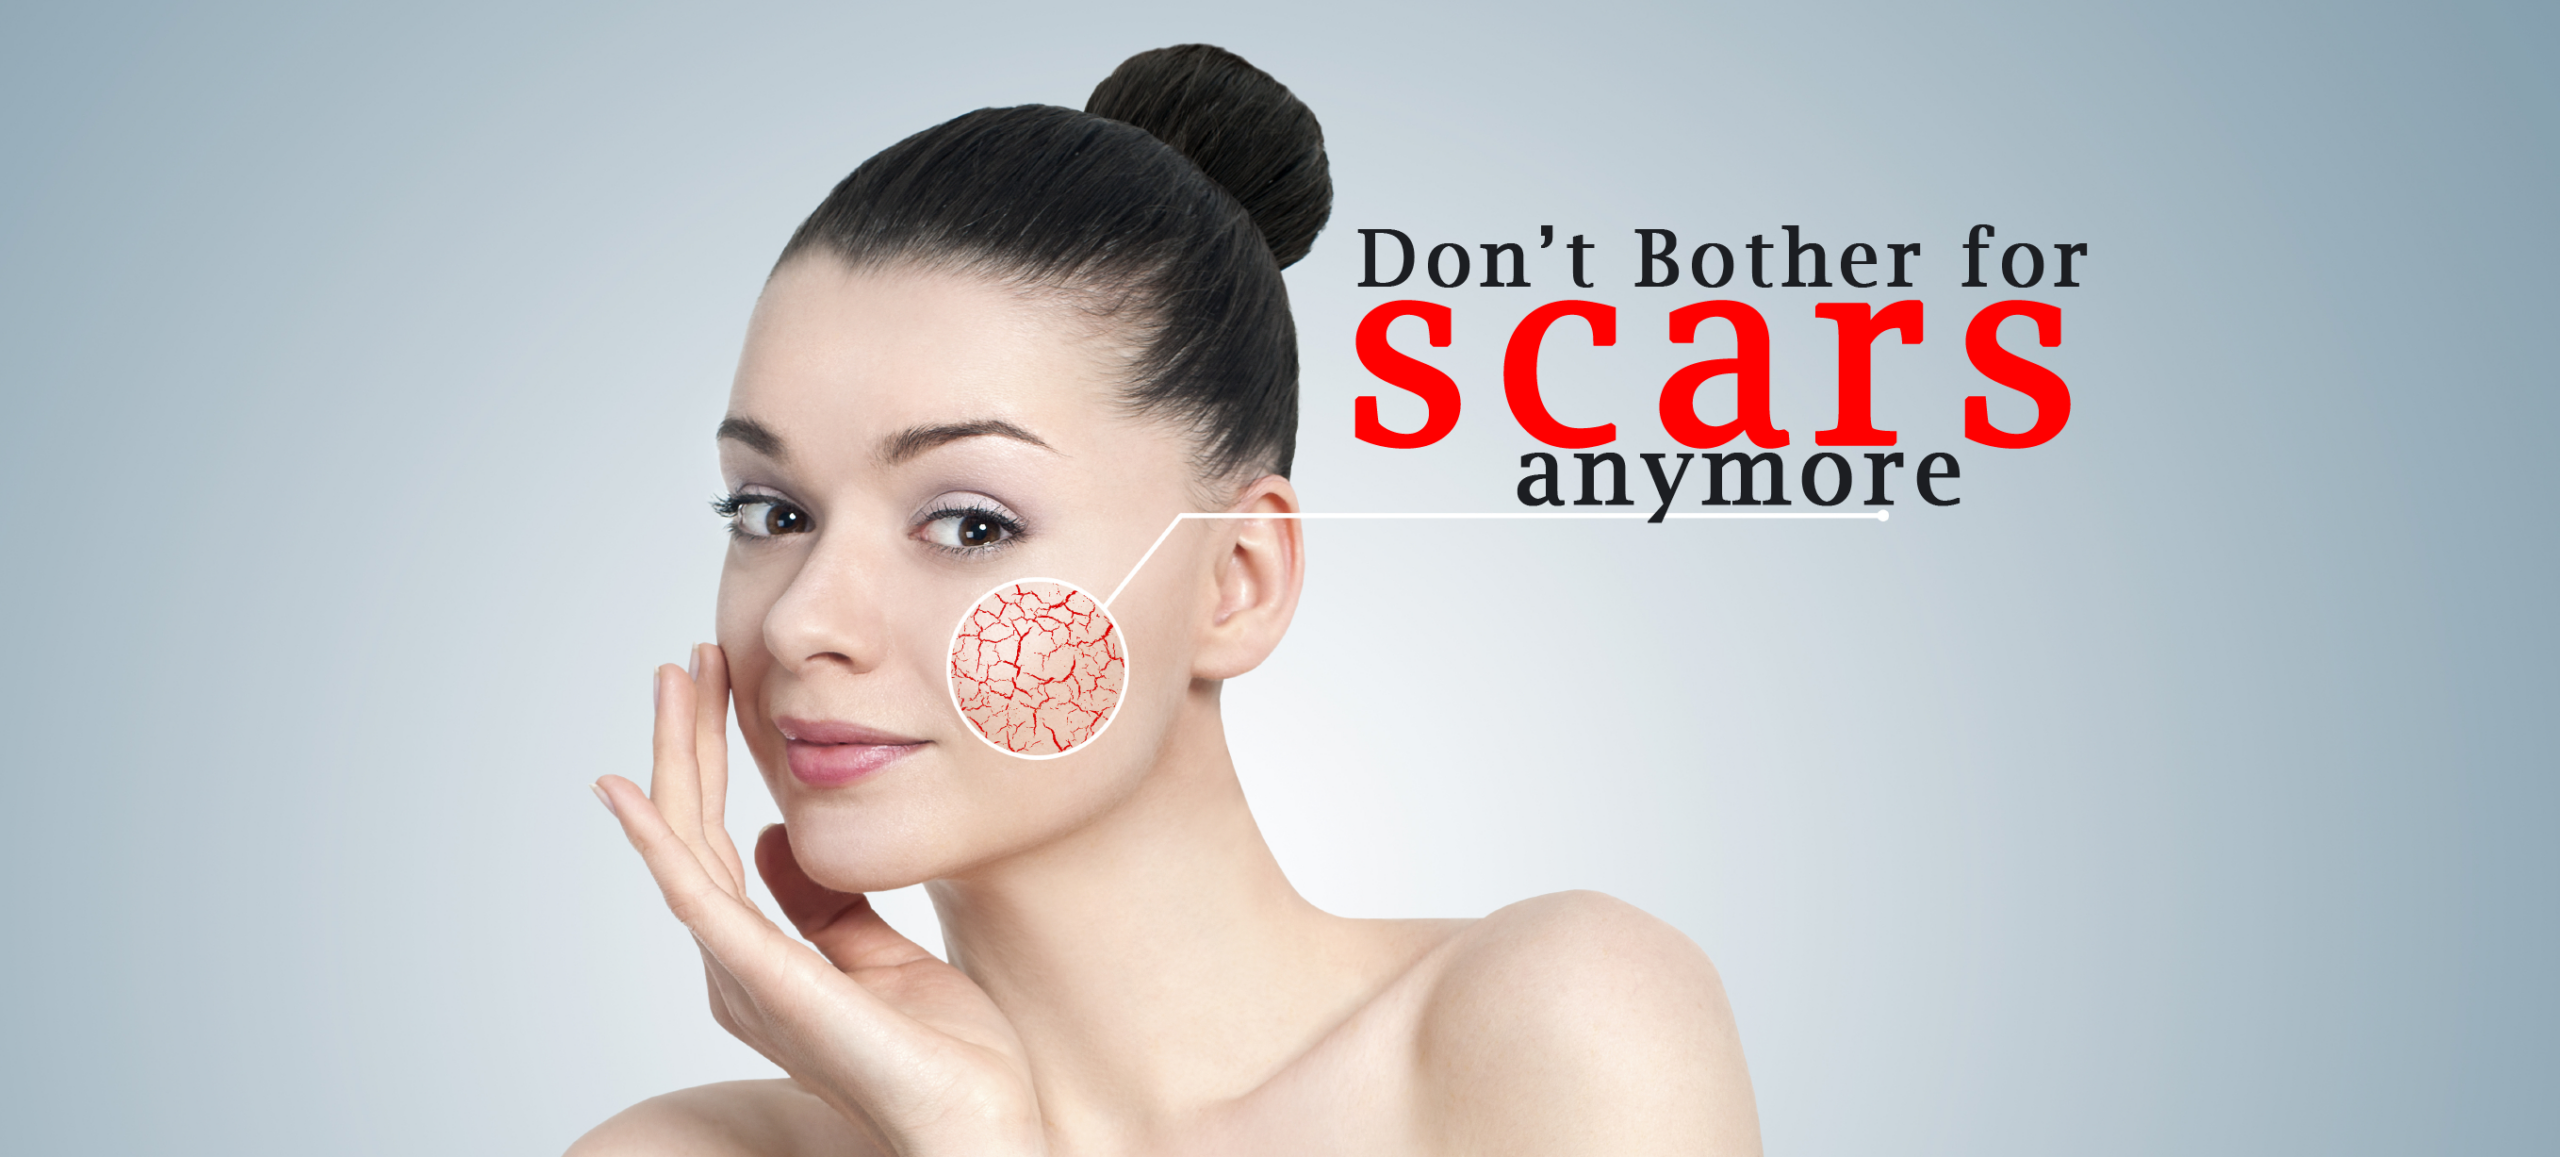 Most effective ways to get rid of pimple scars